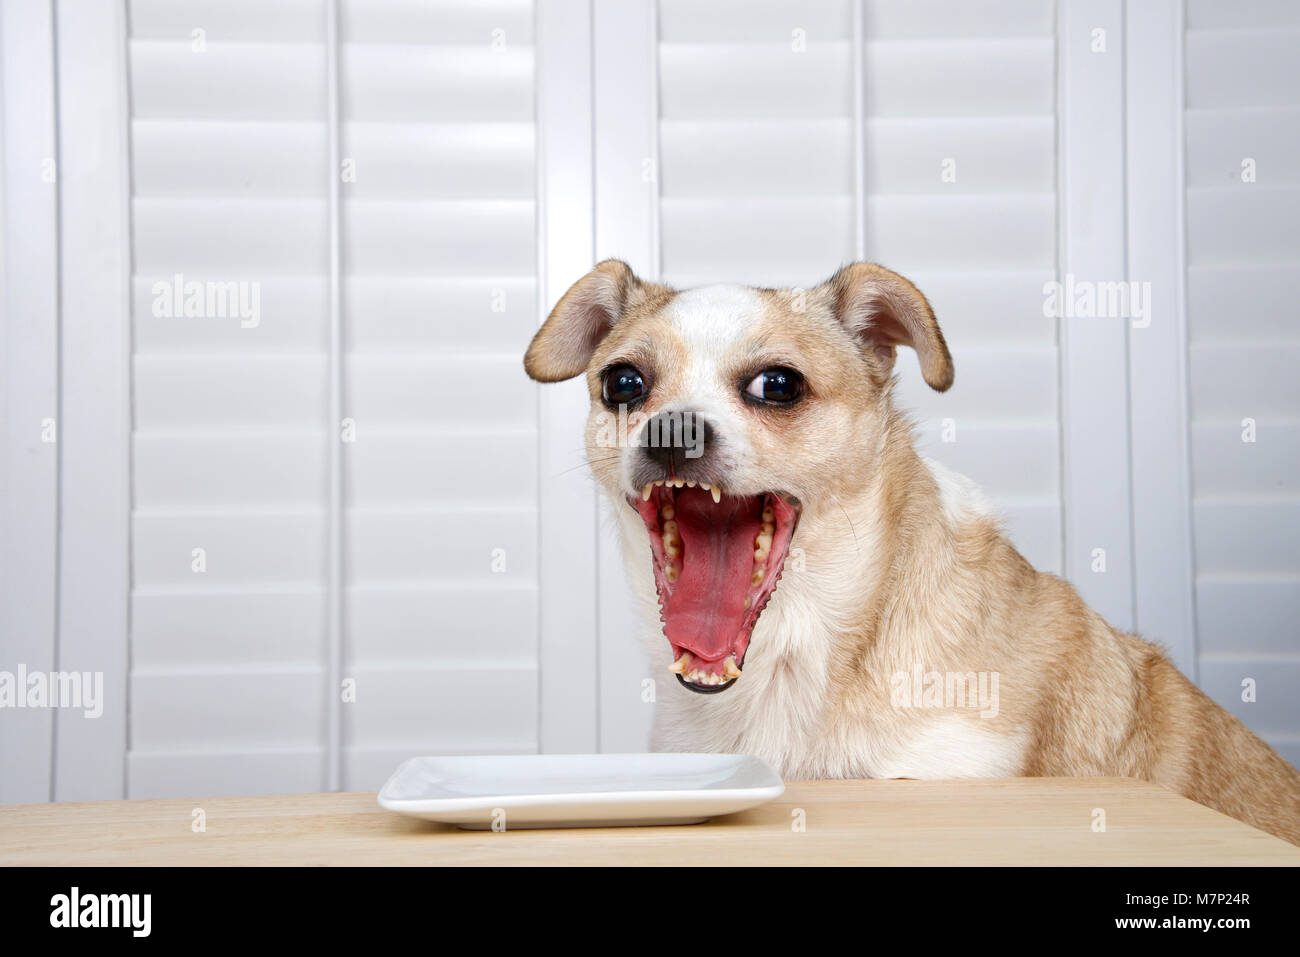 One senior chihuahua dog sitting at kitchen table waiting for food. Square white plate empty. Window background with shutters. Mouth wide open Stock Photo